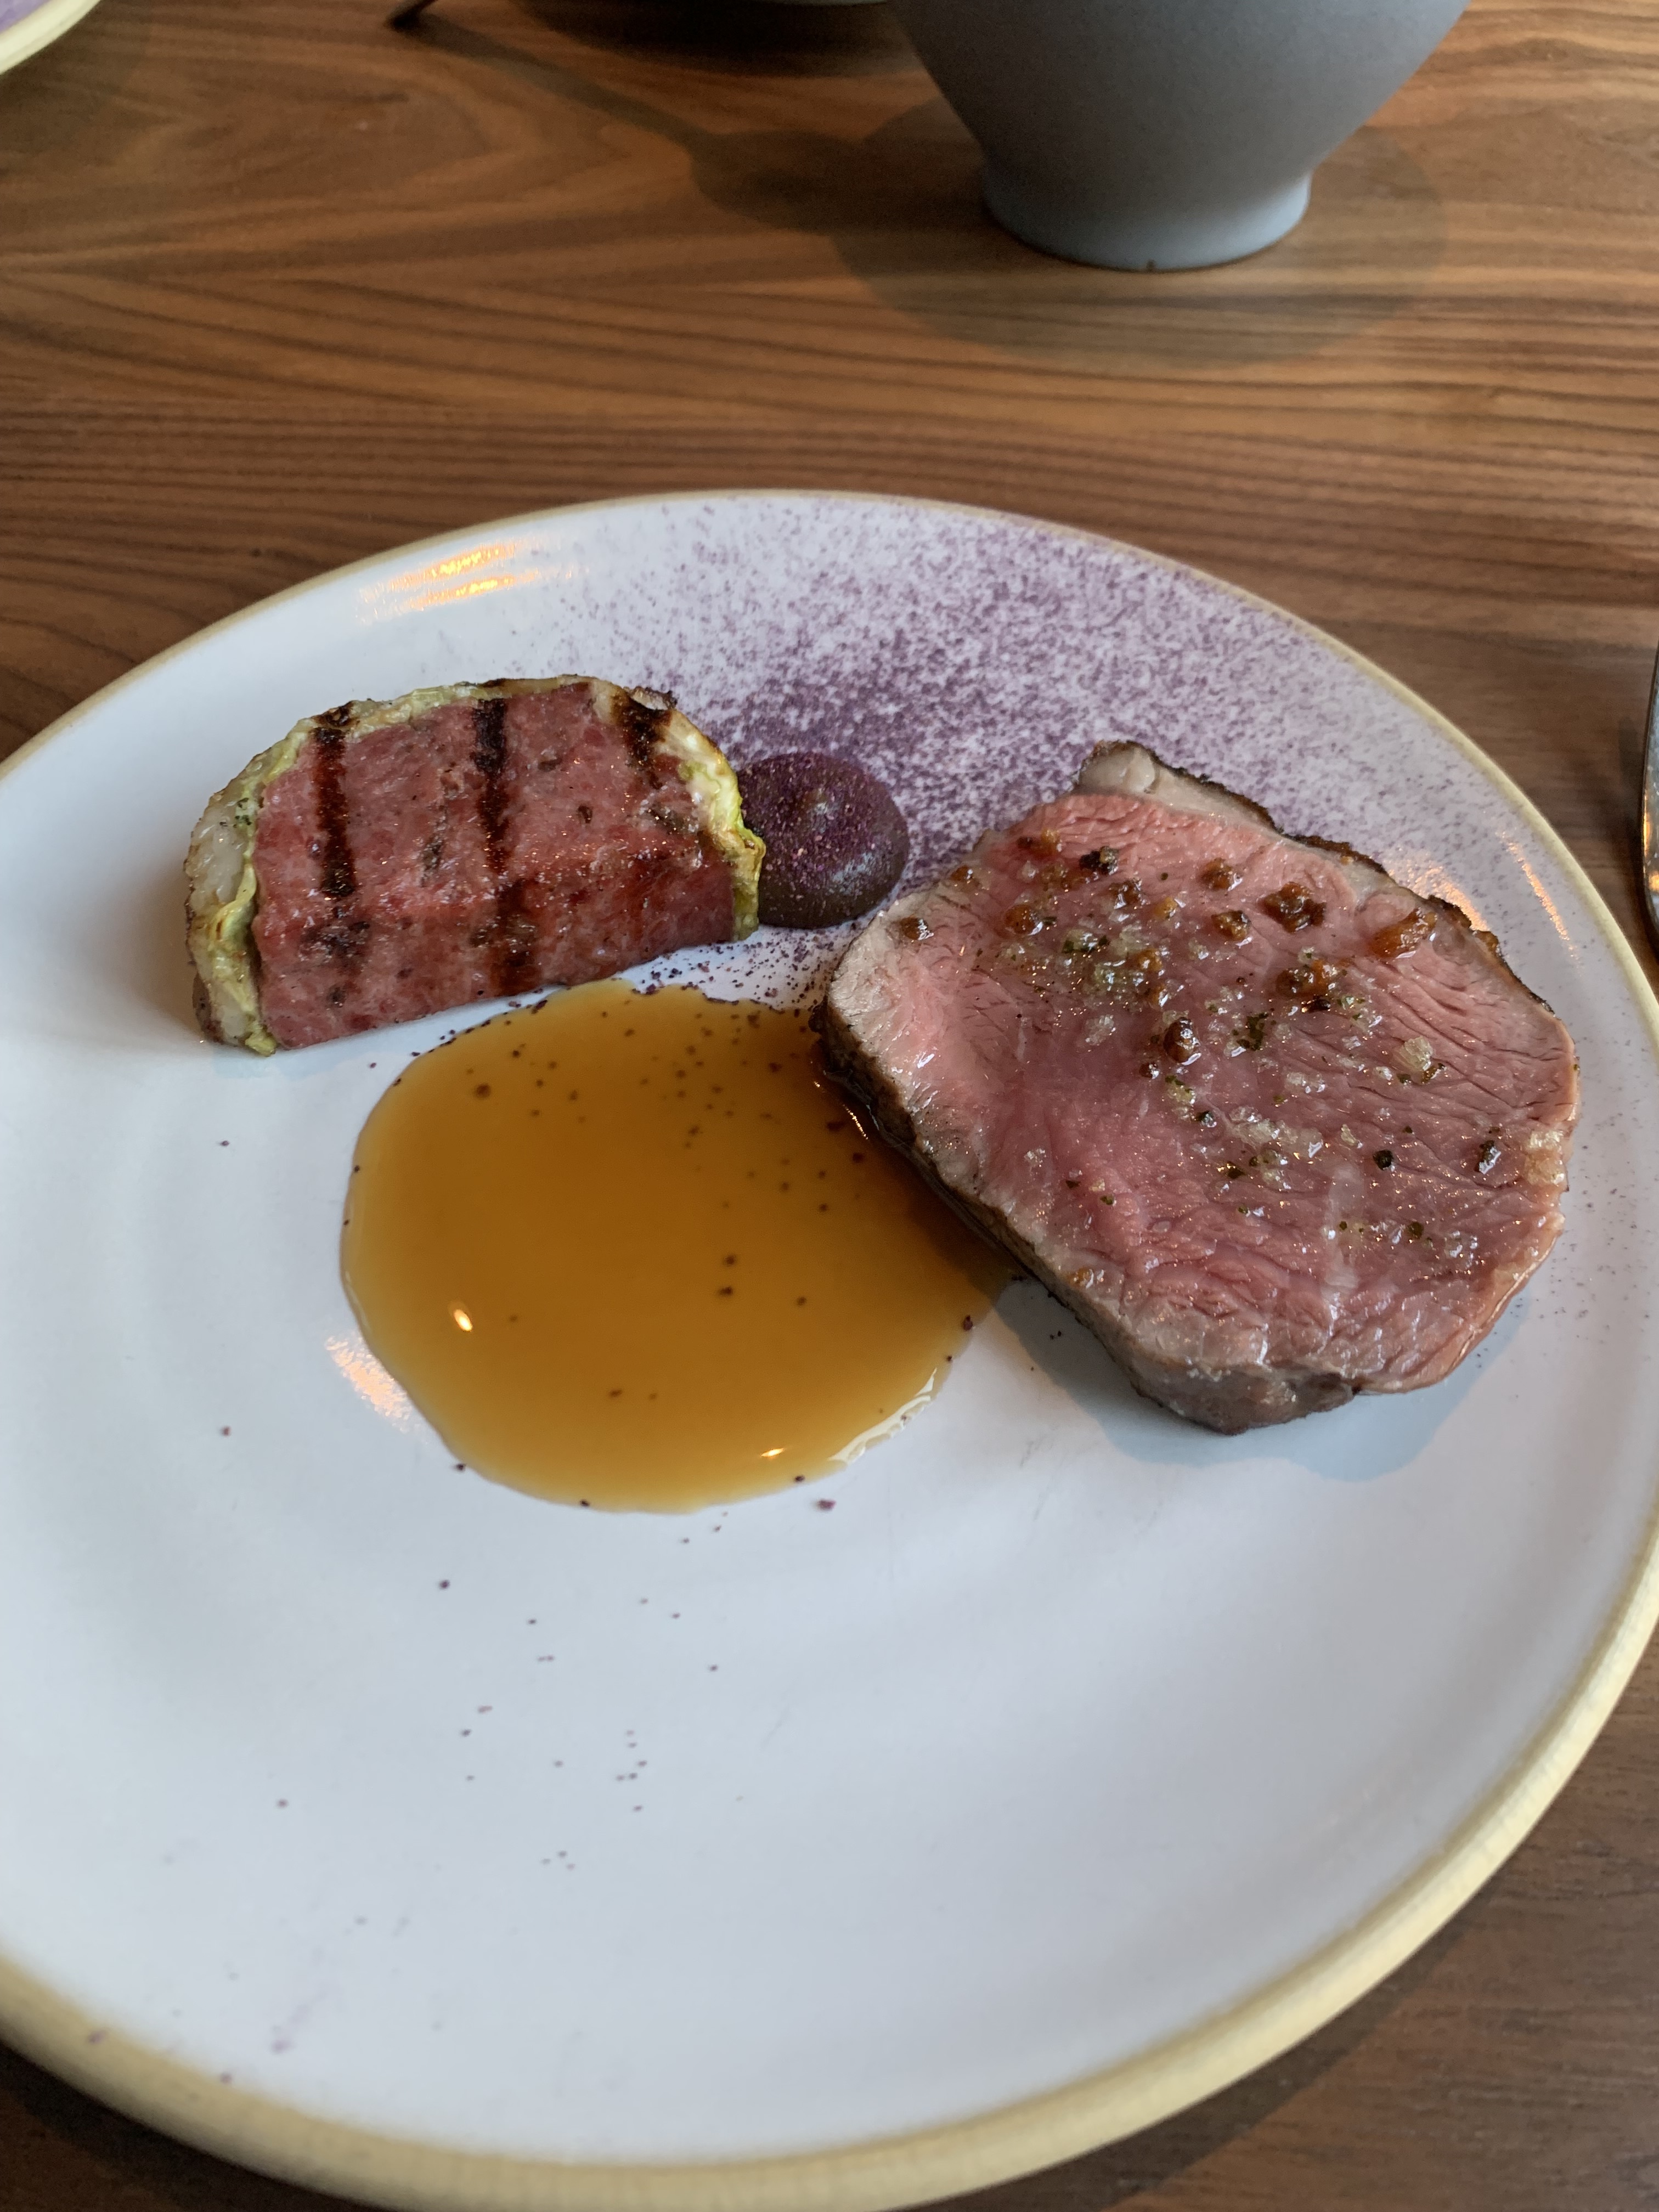 Half-moon slice of sausage wrapped in cabbage, with nice grill marks over it. Served next to a round of medium beef, with a dollop of ketchup between them, and a pool of golden-hued sauce beneath. There is a scattering of purple cabbage dust on the plate for aesthetics. 